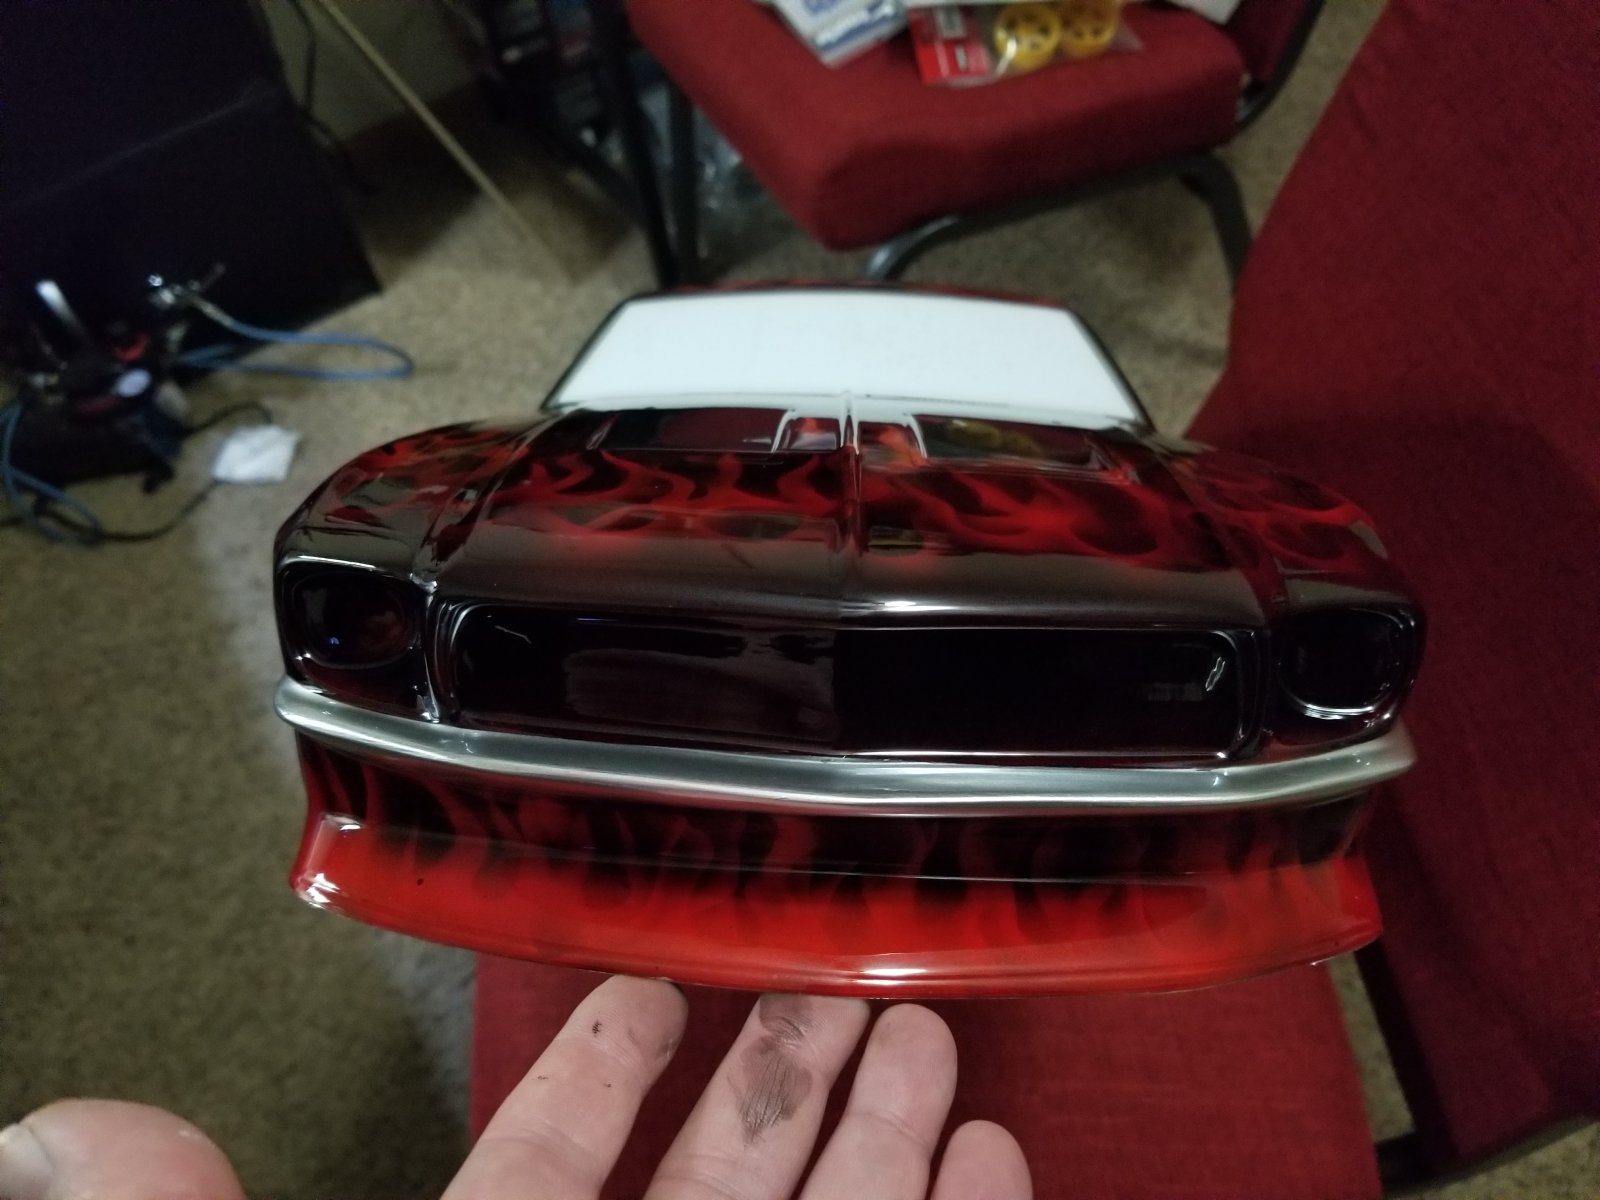 Any paint questions? You've seen my work. I've been painting rc bodies for  22 years now. Anything you'd like to know? Anything I can help you out  with? I only have a